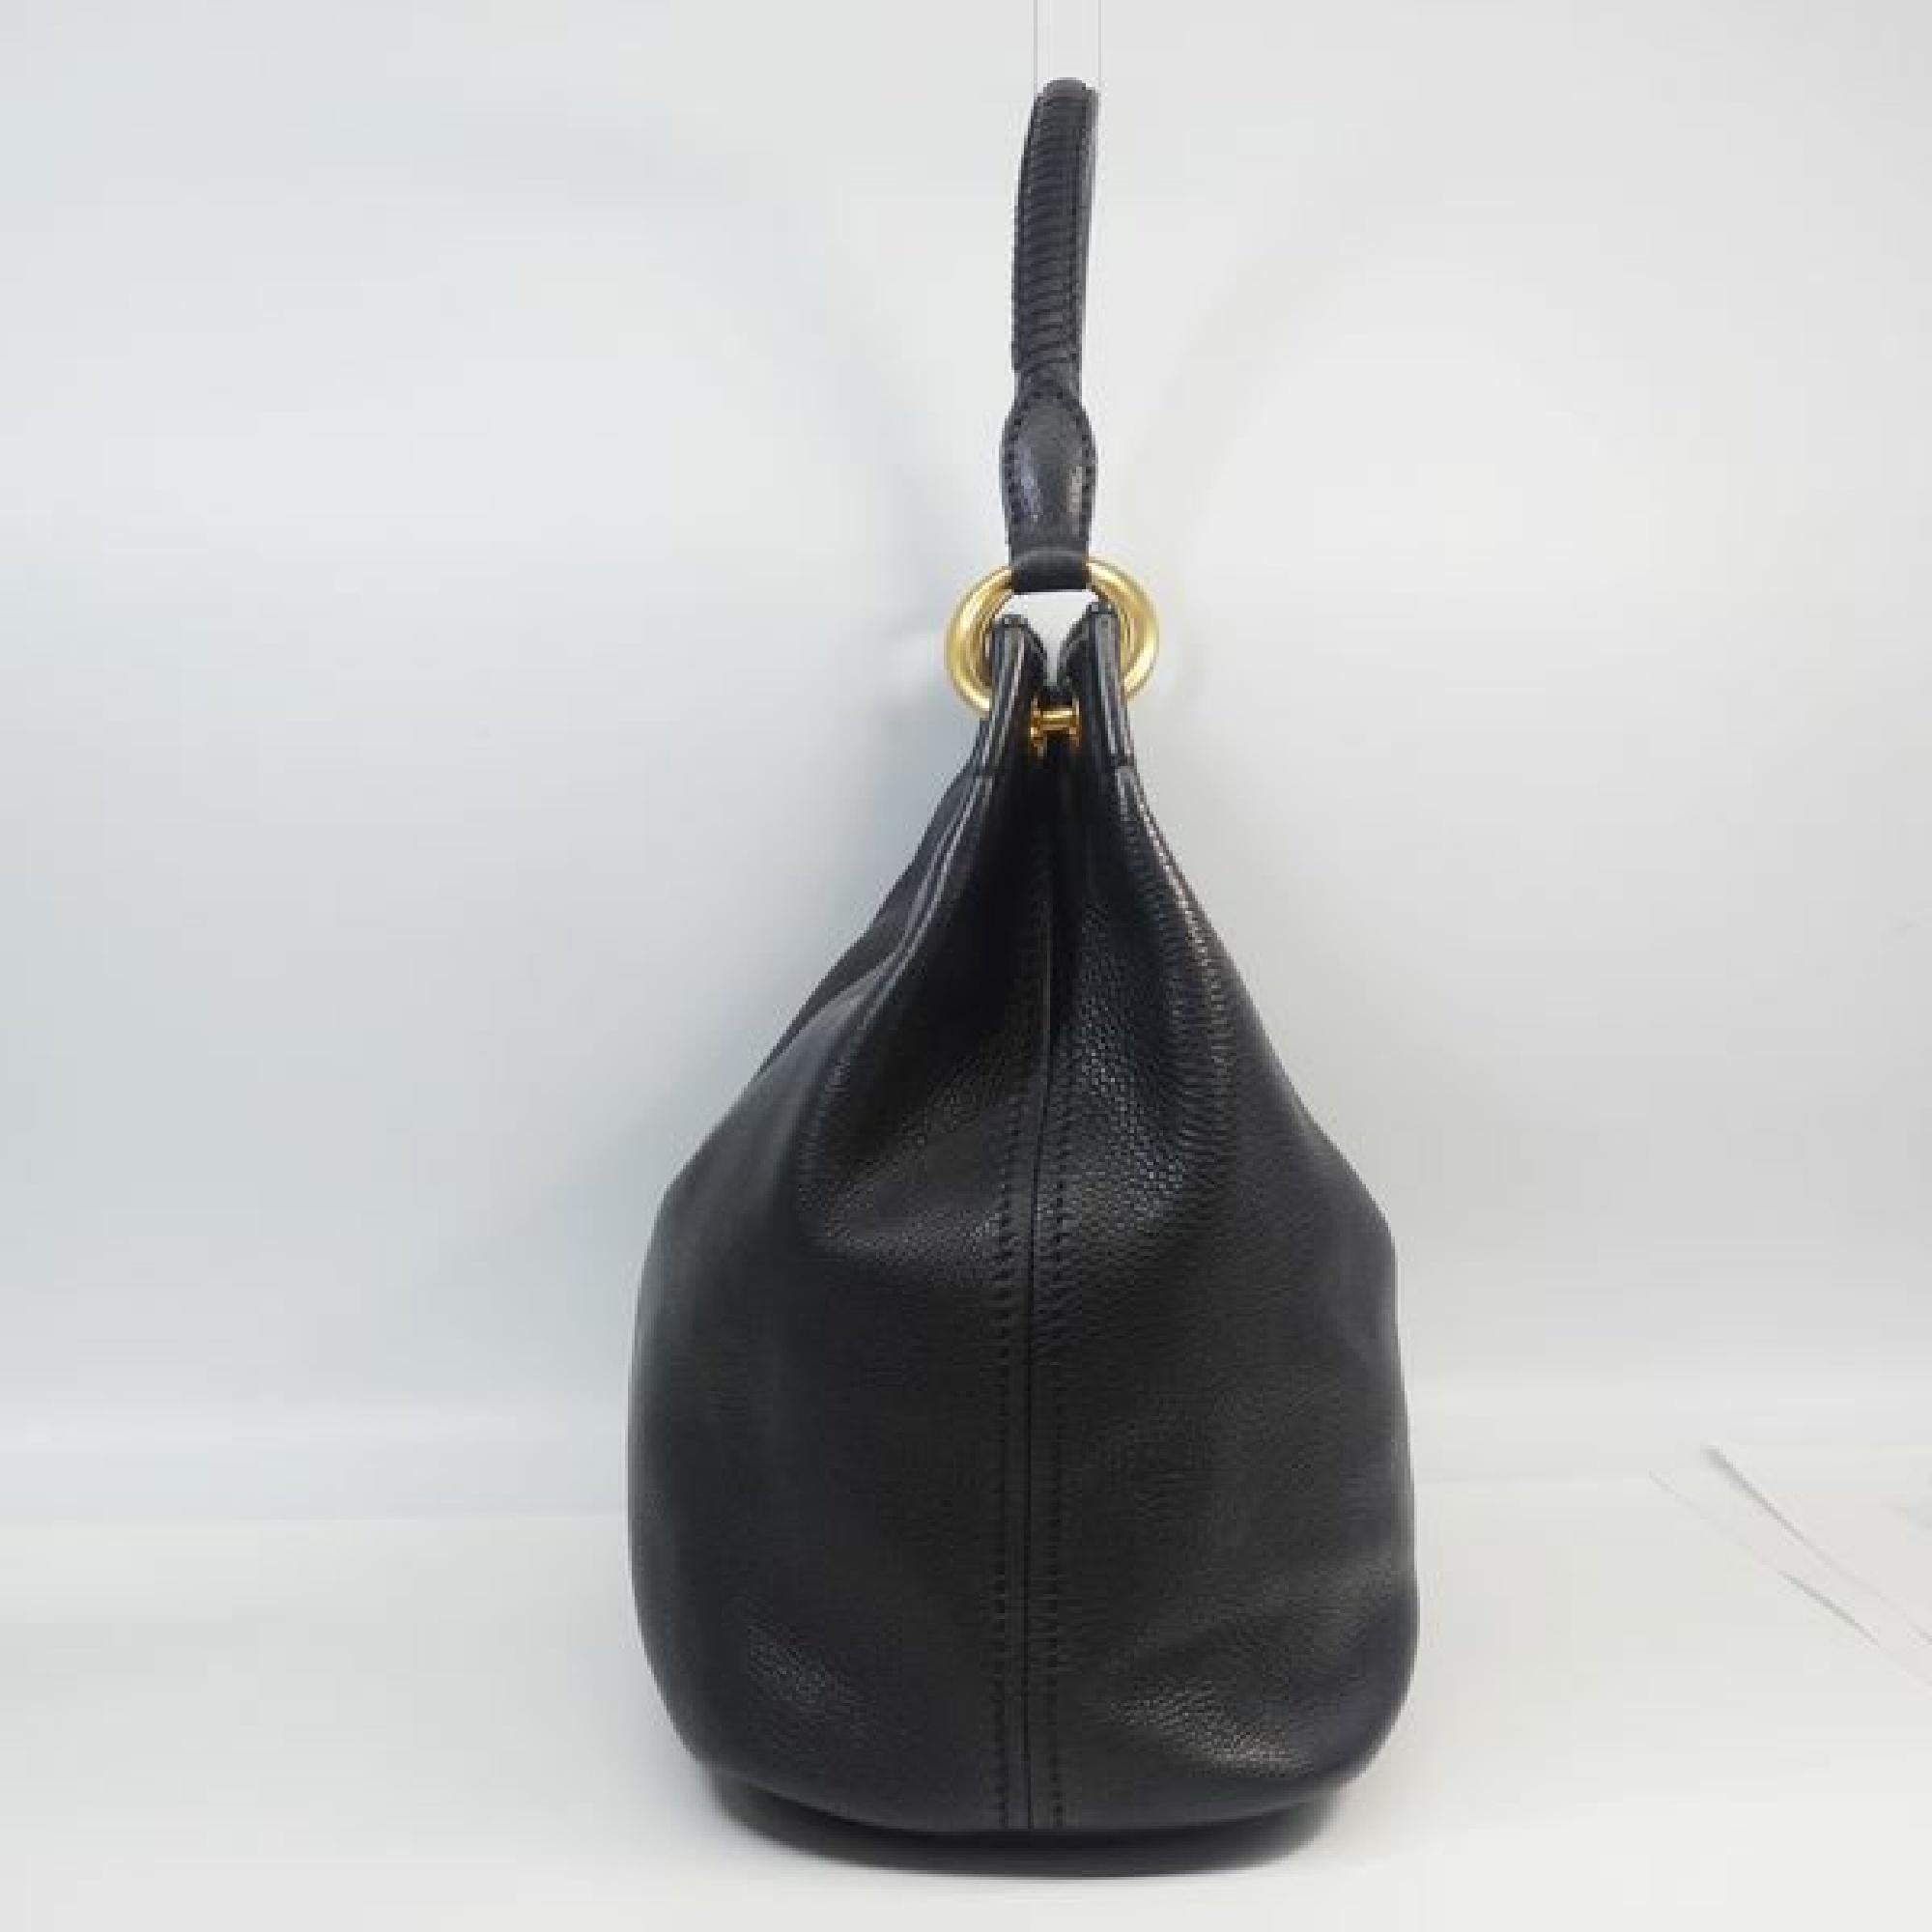 An authentic PRADA one shoulder Womens shoulder bag BR4712 black x gold hardware. The color is black x gold hardware. The outside material is Leather. The pattern is one shoulder. This item is Contemporary. The year of manufacture would be